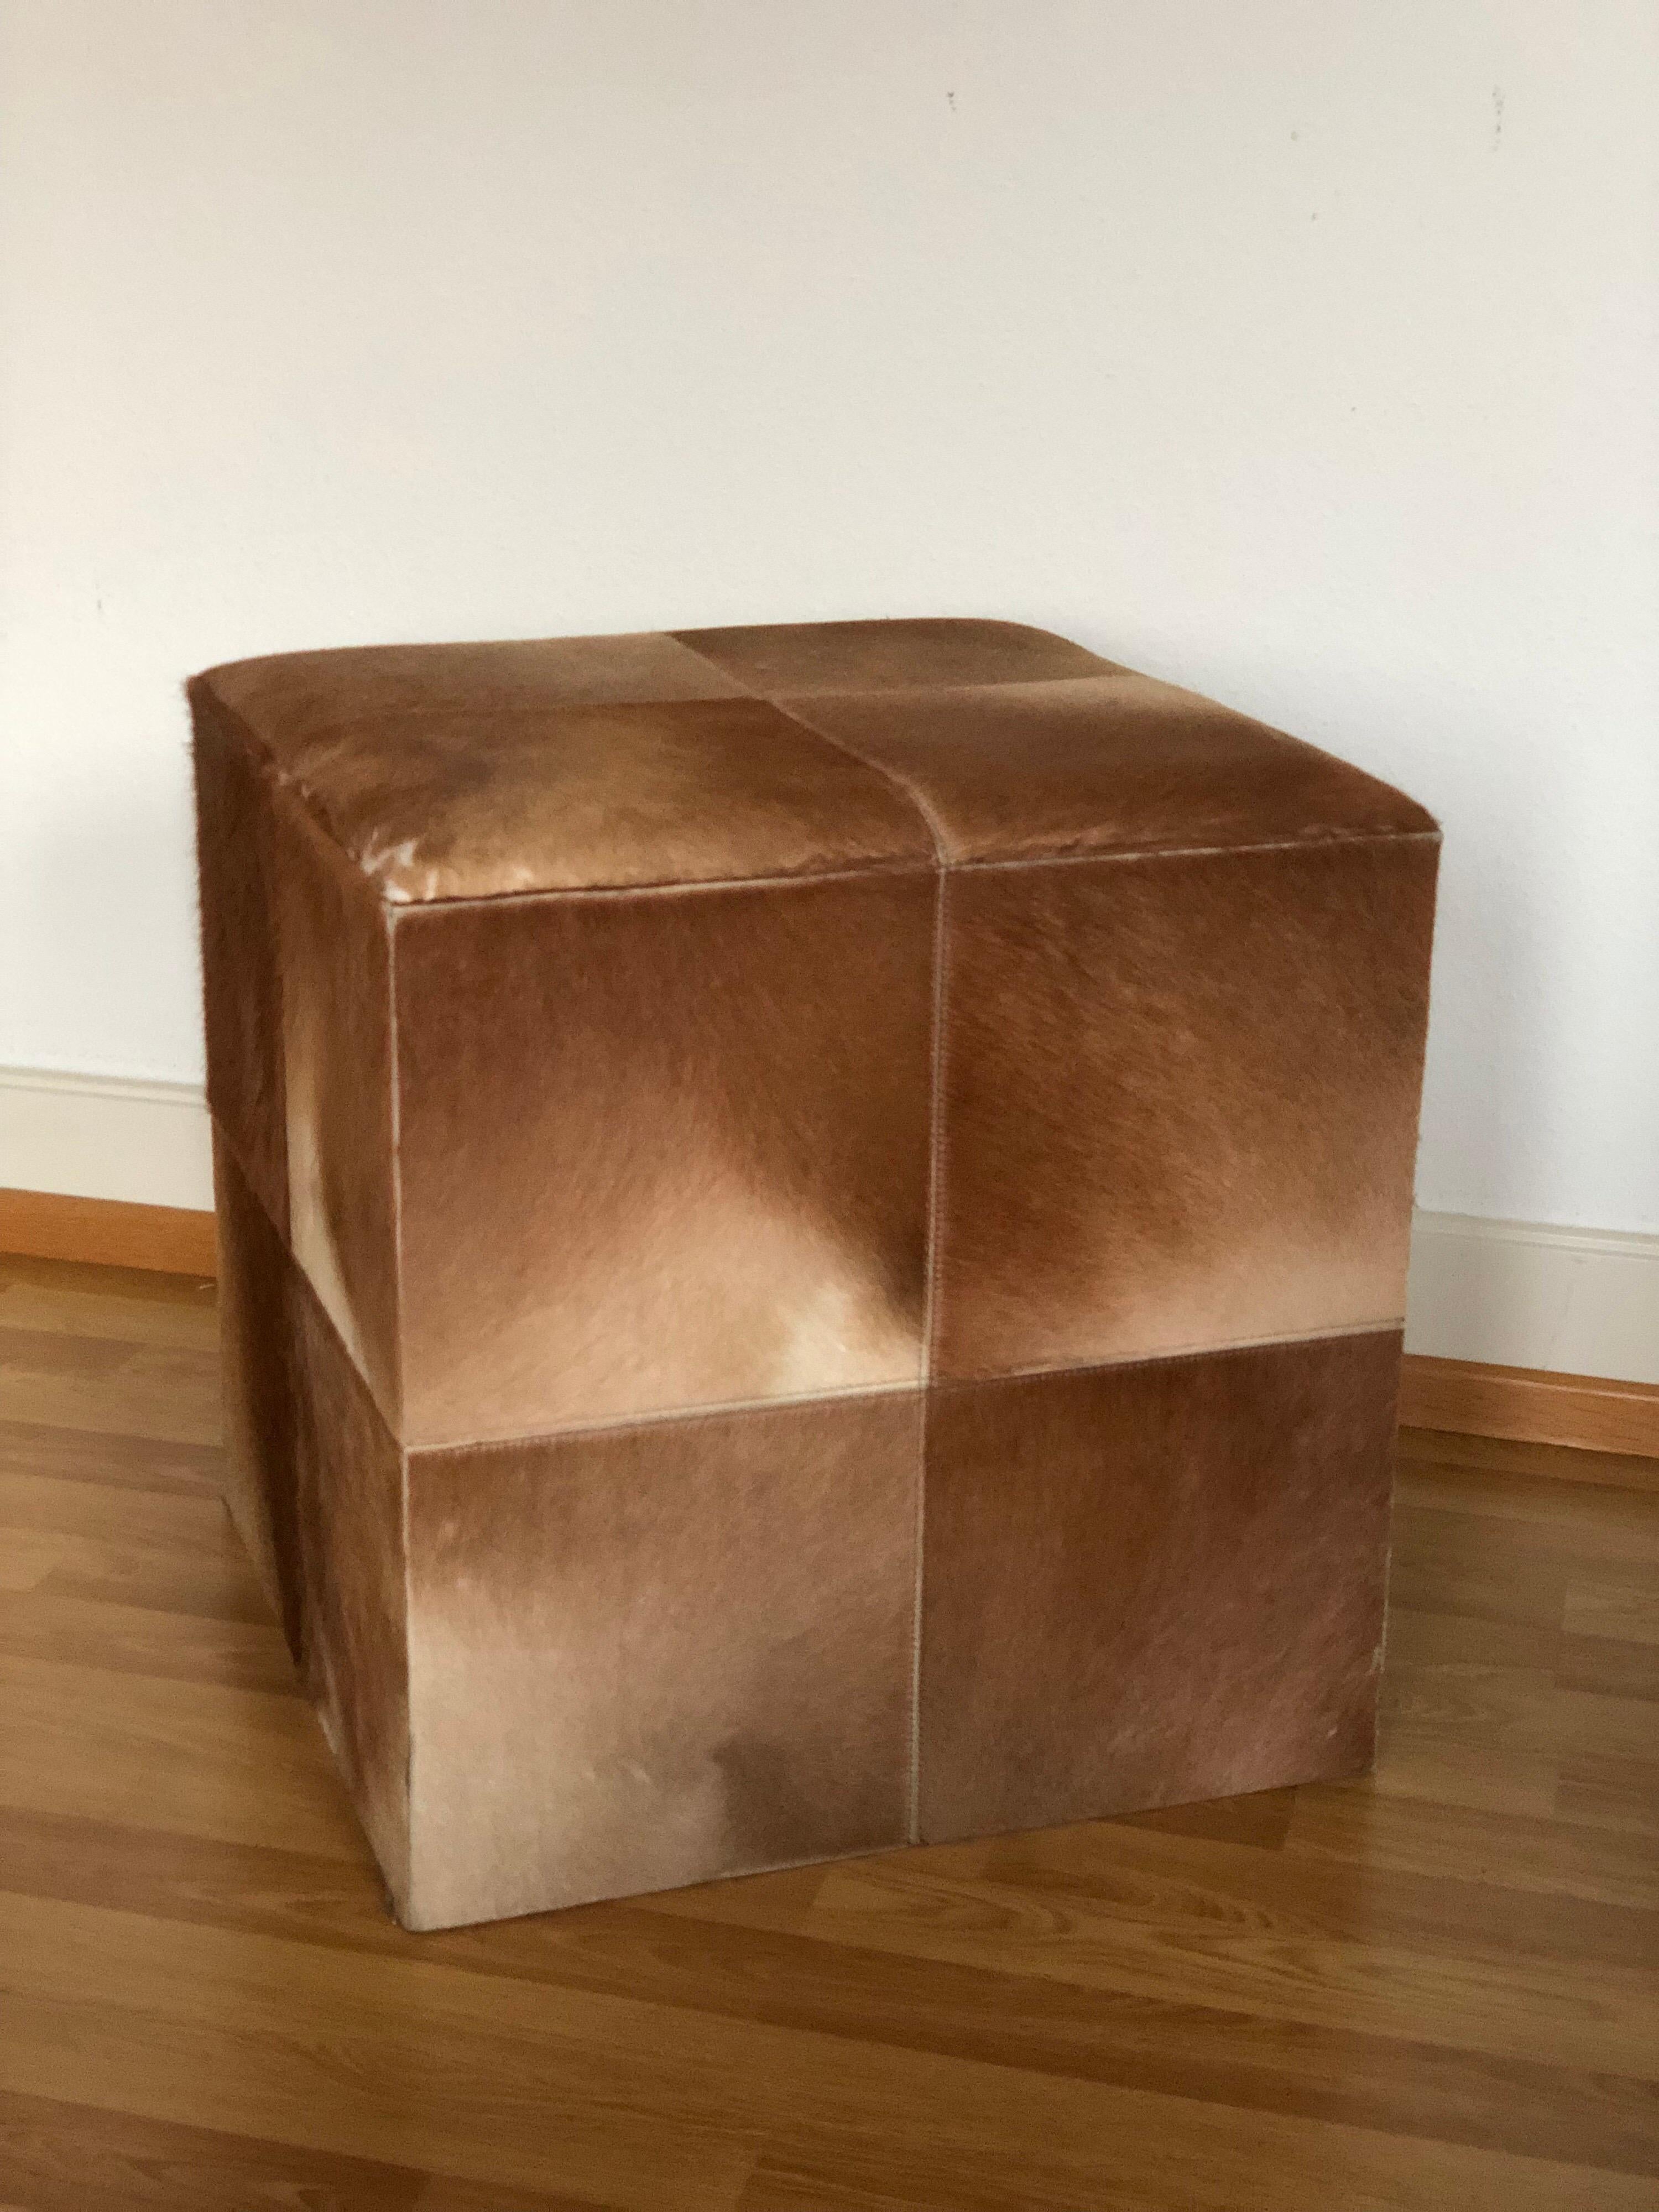 Cowhide cube ottoman or pour in very good condition,
circa 1990.